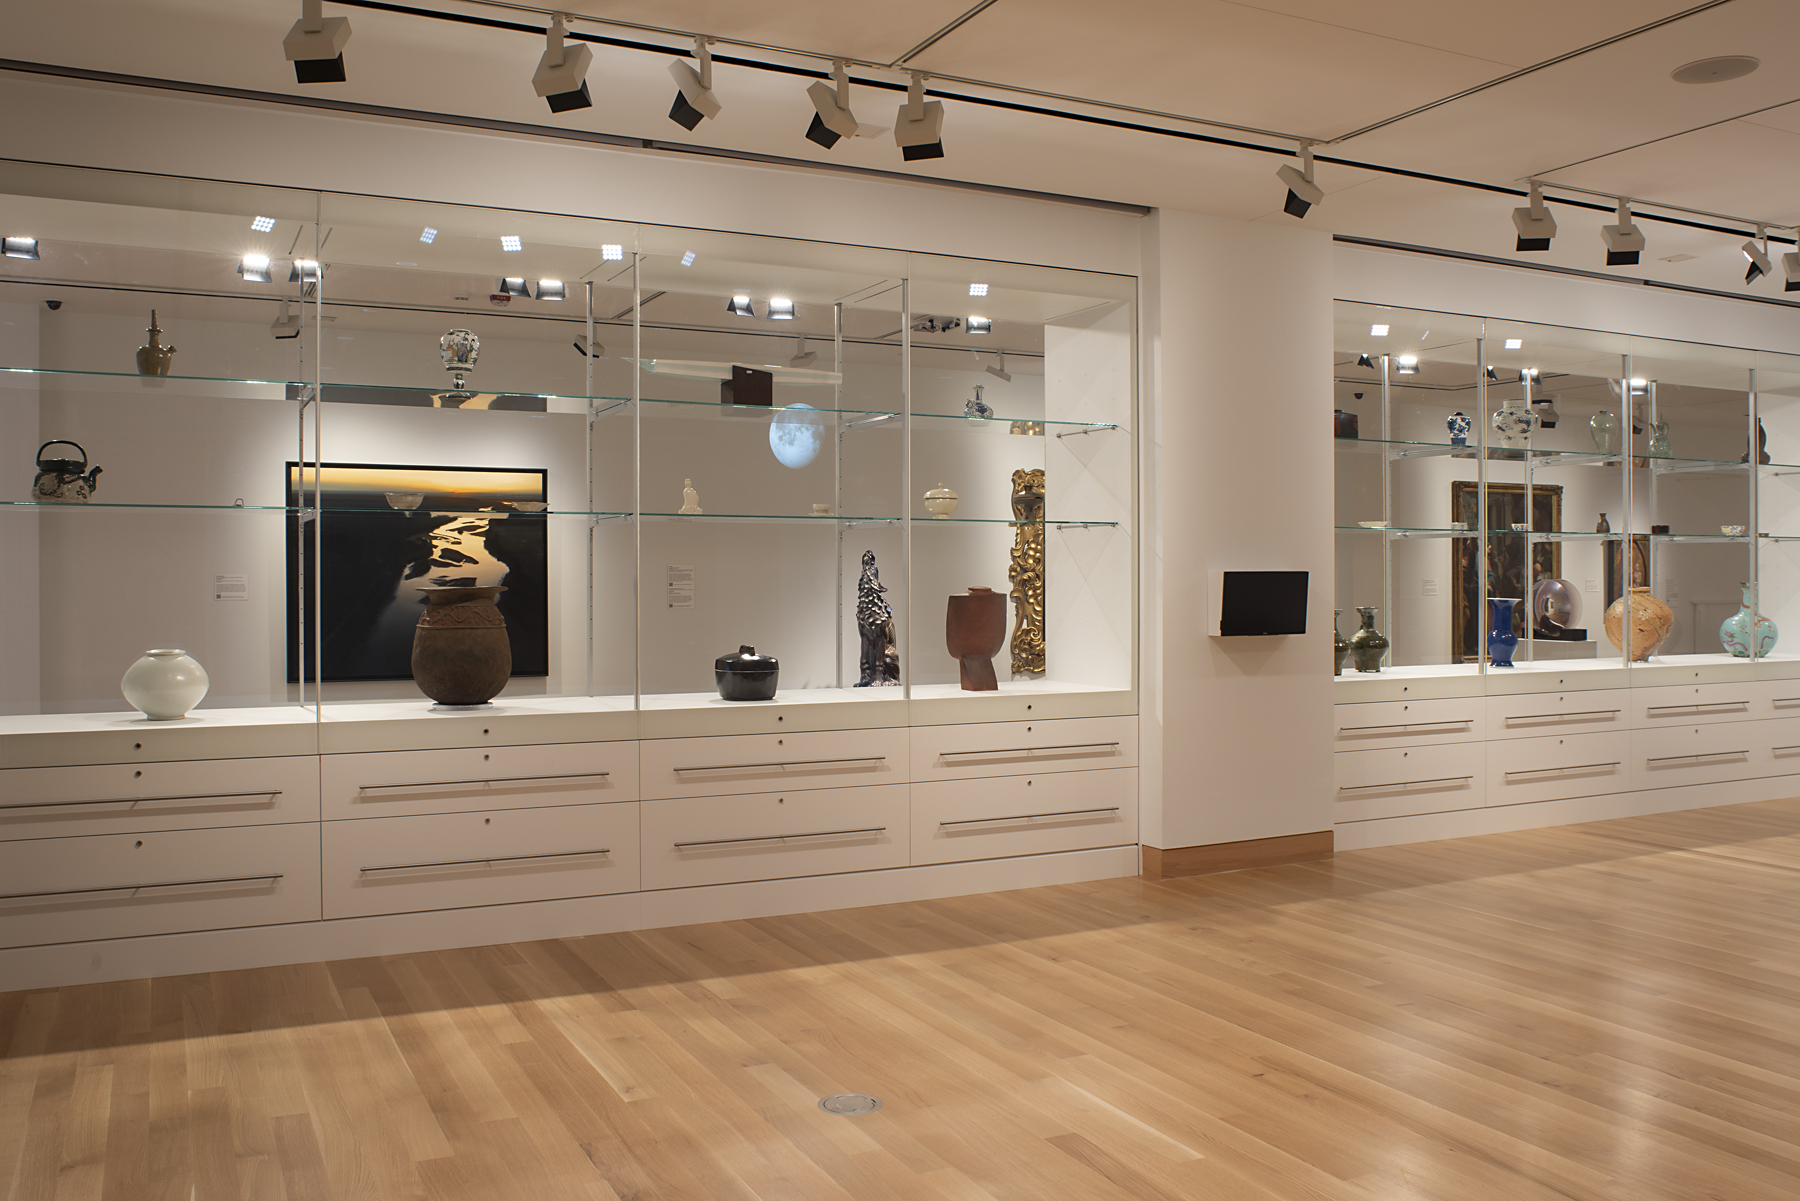 A wall of glass cases holds works of art in various shapes and sizes